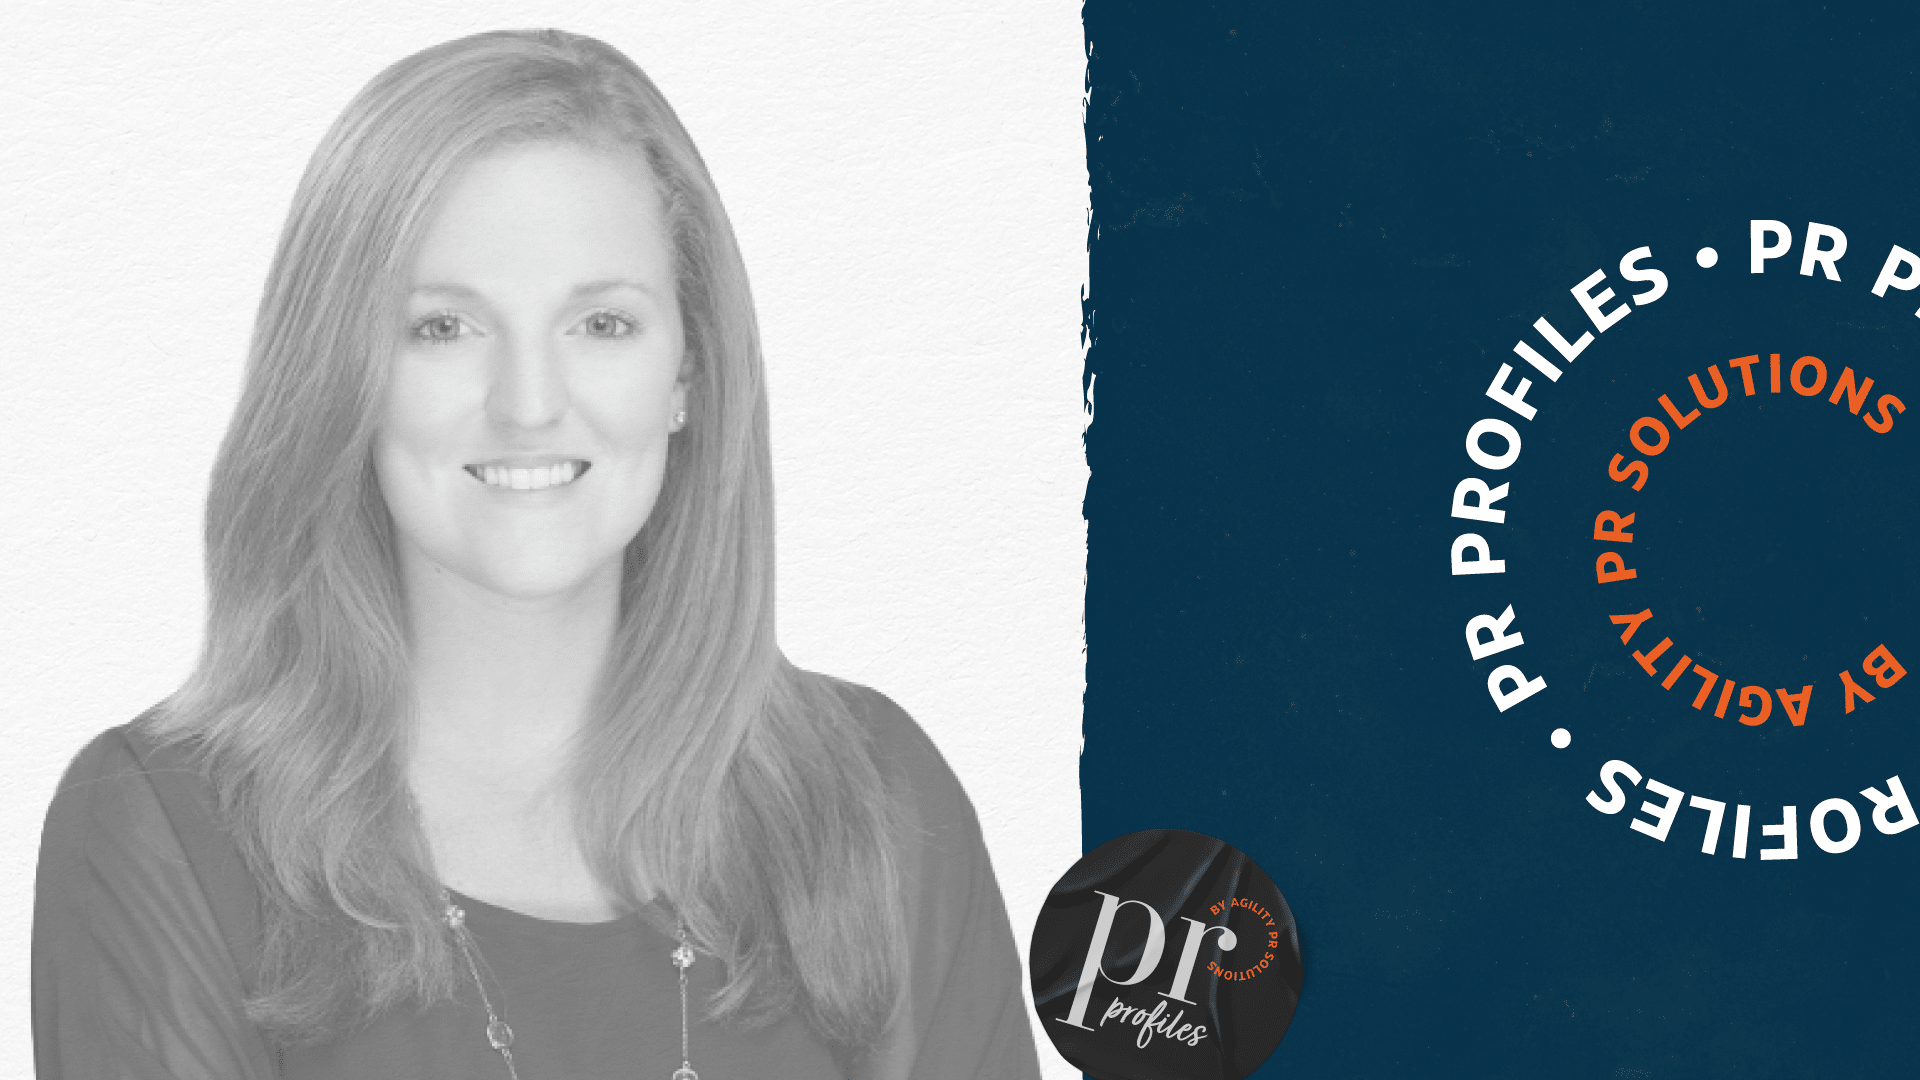 PR Profiles, Episode 32: A Conversation with Stephanie Wight, VP of Media Relations at CURA Strategies